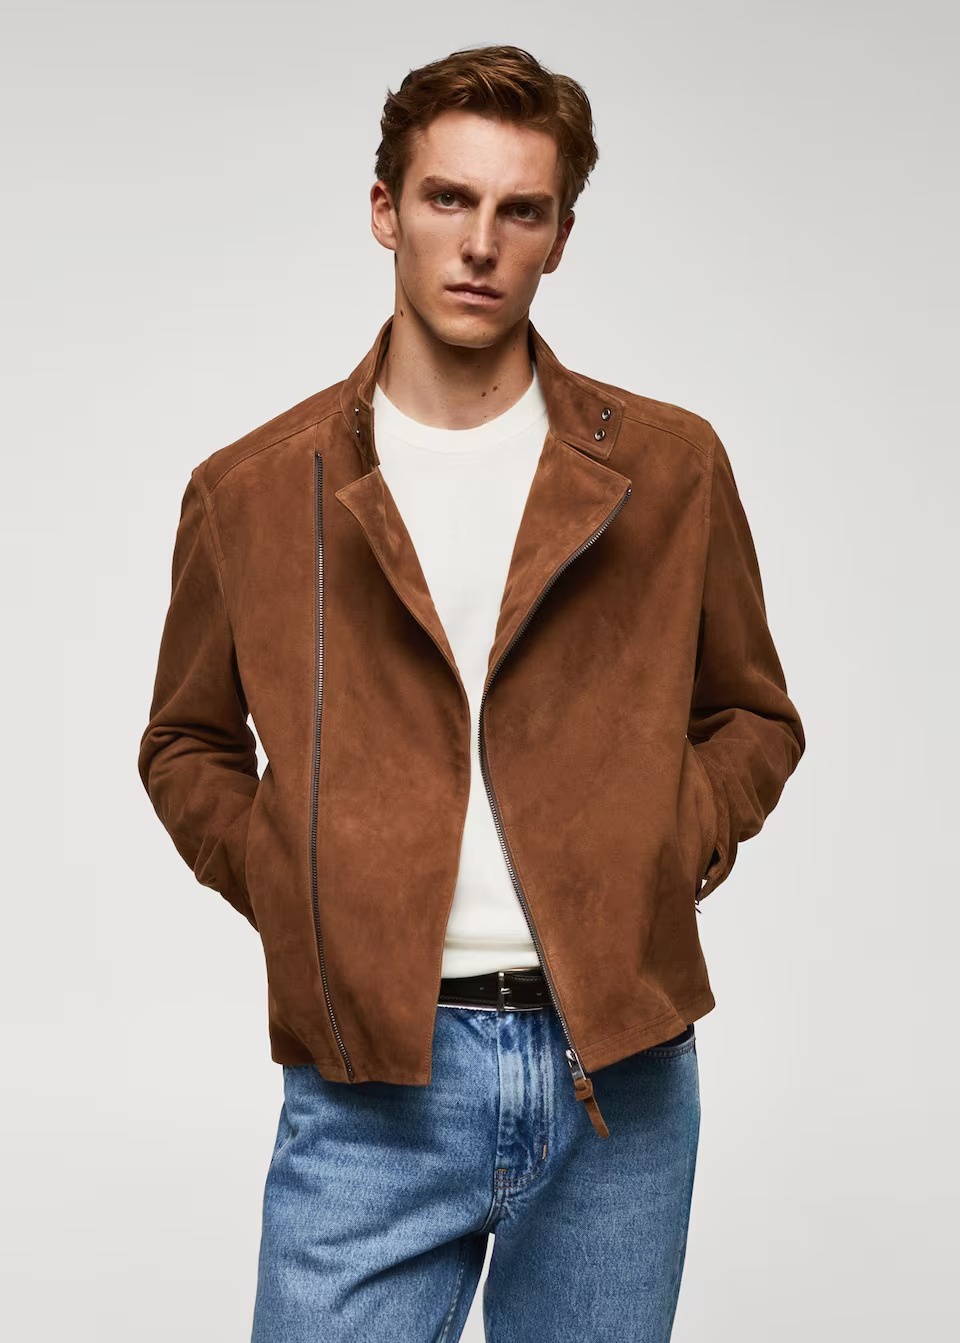 Perfect Fit: Petite Suede Jackets Designed for Men